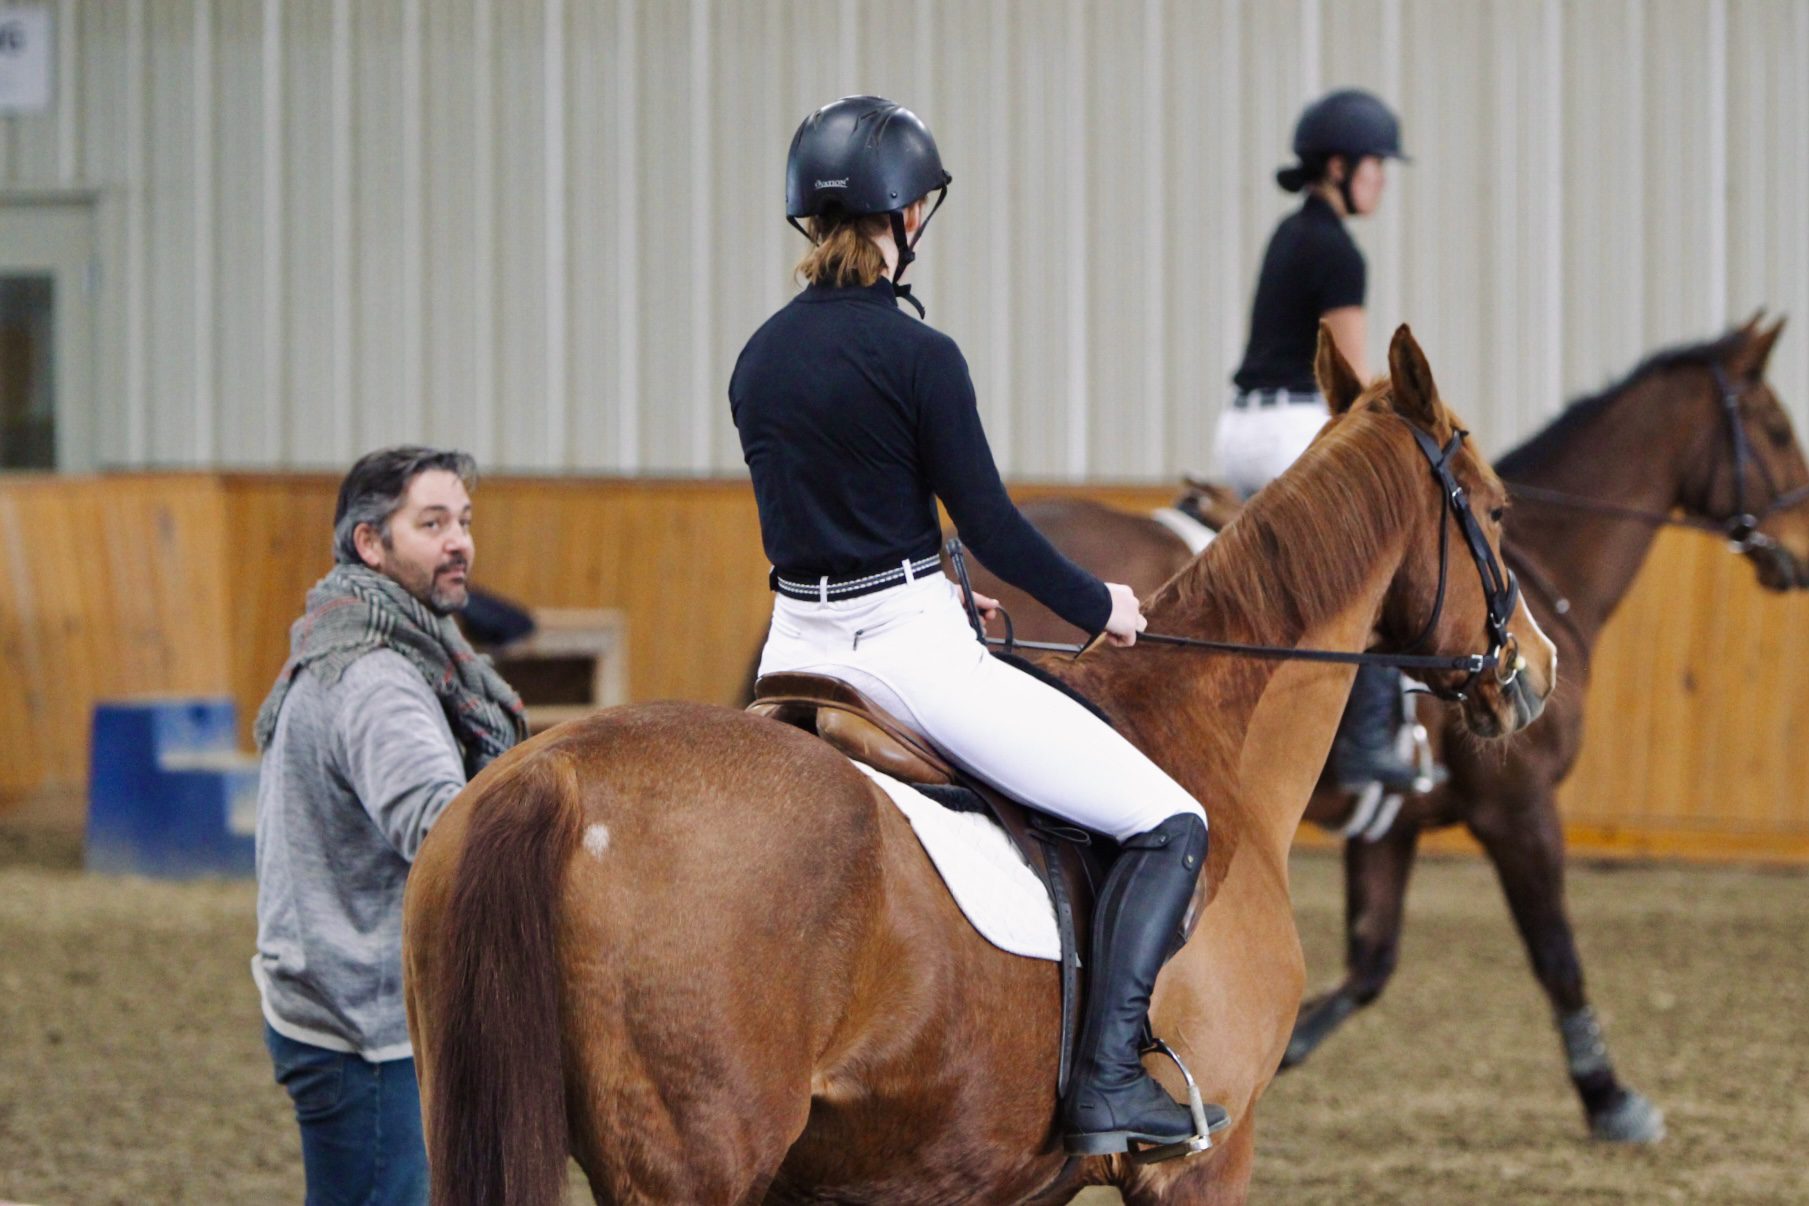 Clinician talking with students riding horses.